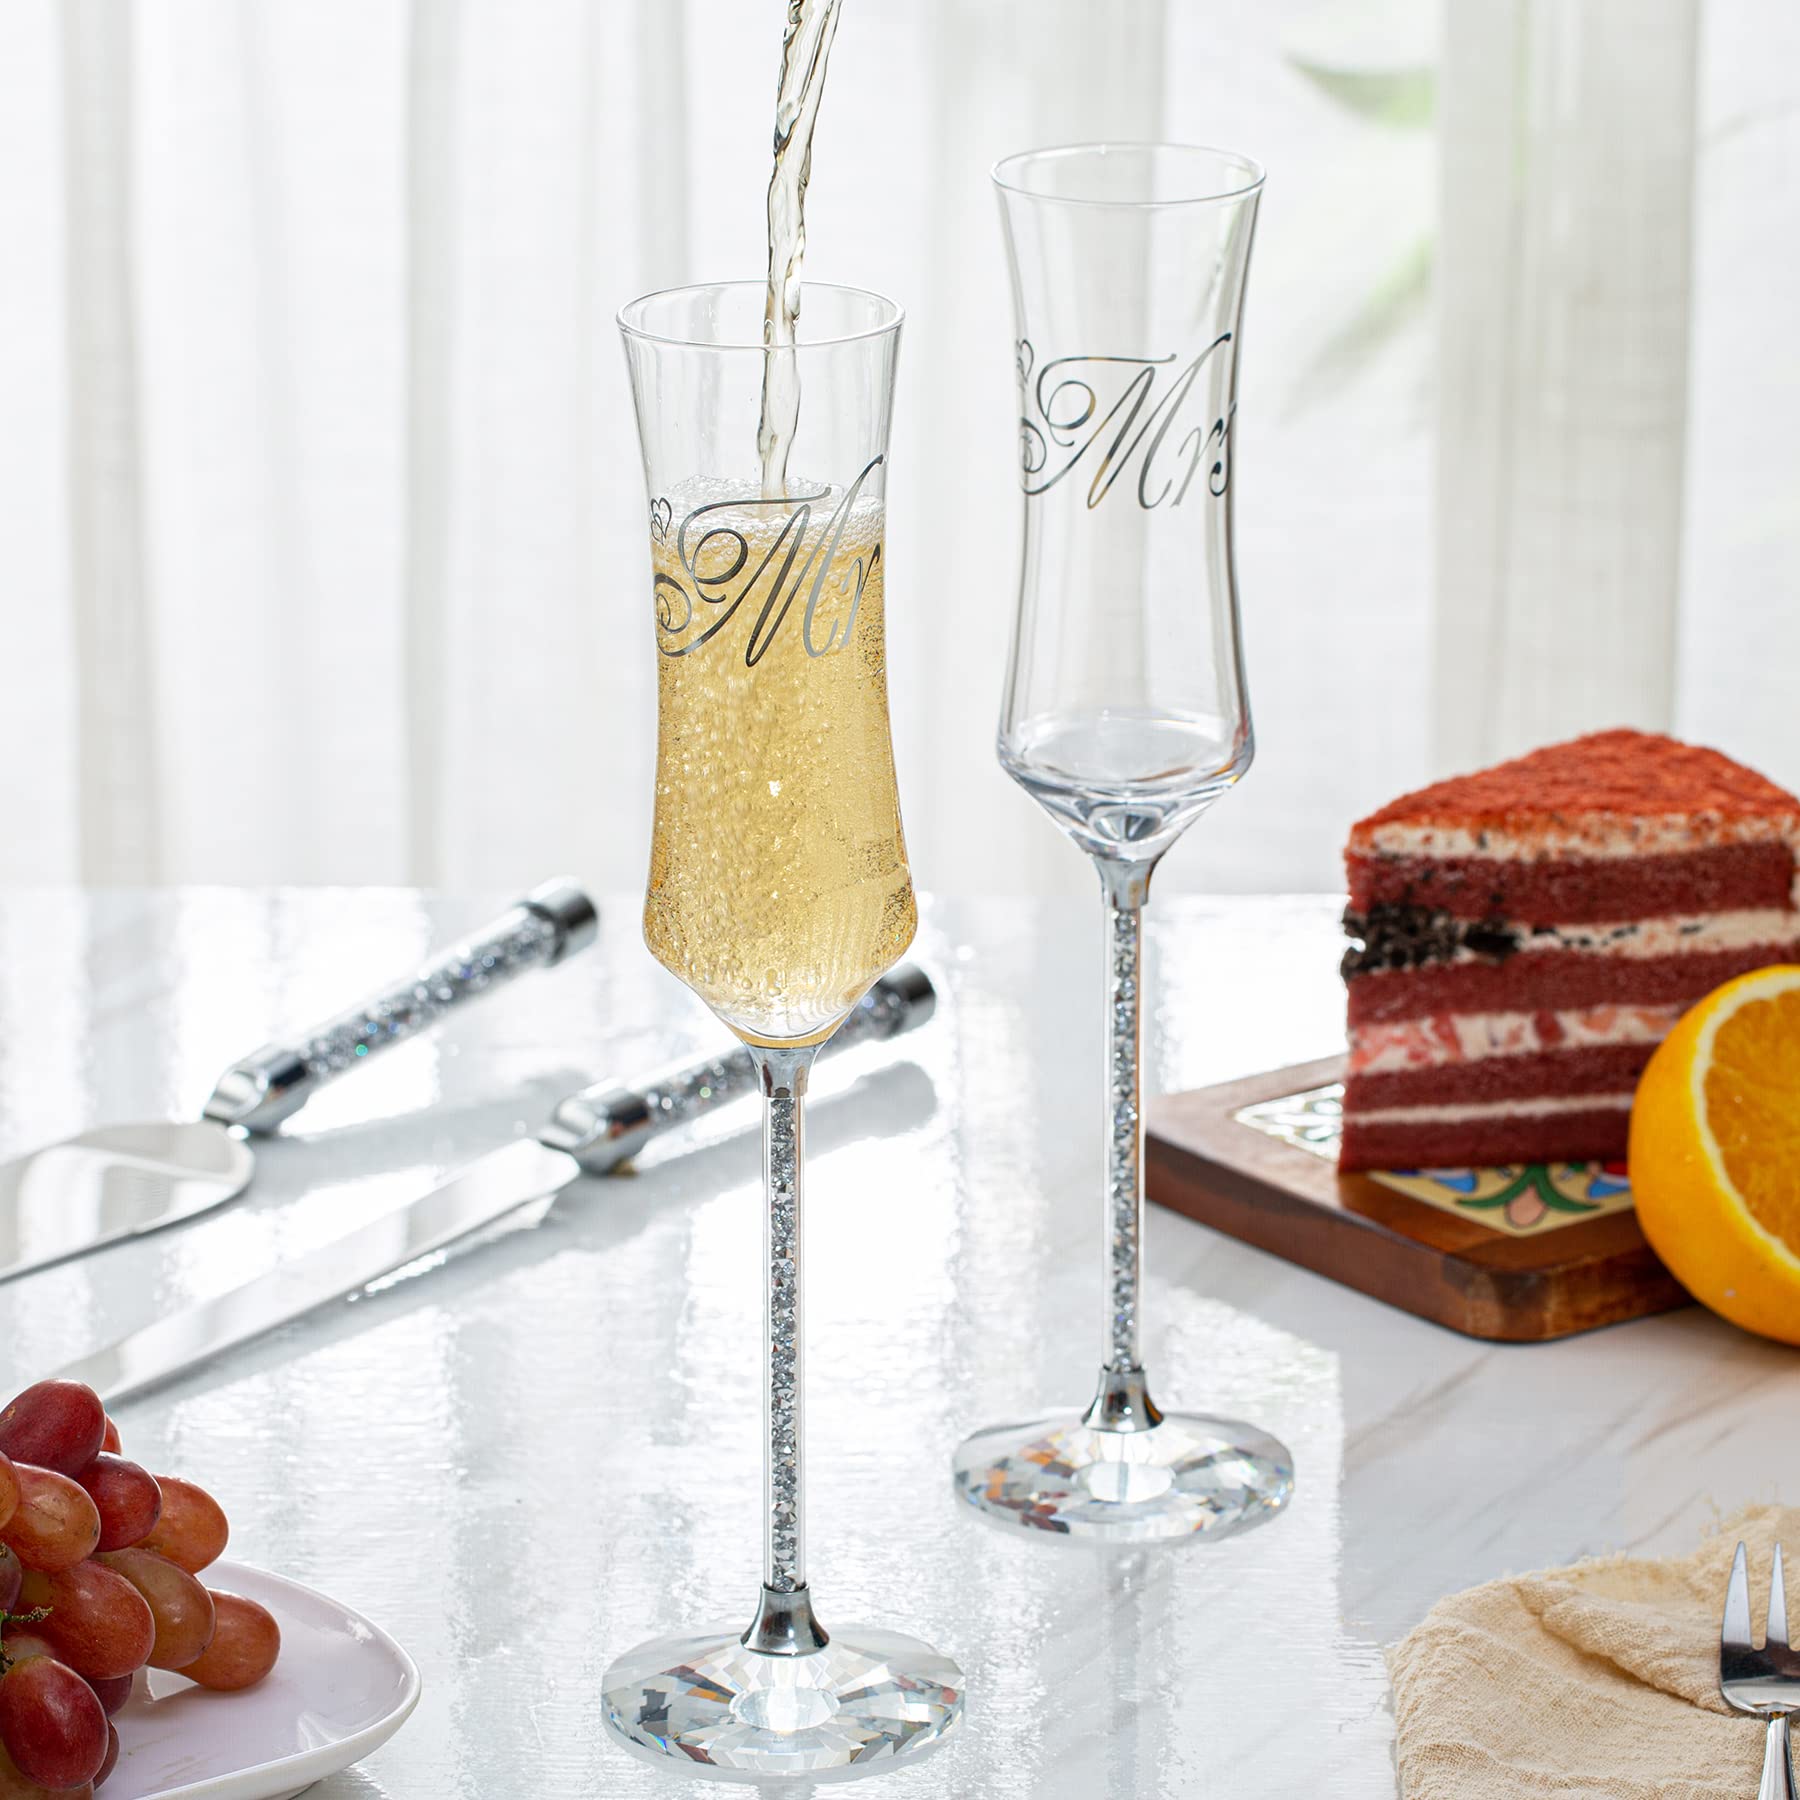 iooiluxry Wedding Champagne Flutes and Cake knife Server Set, Mr and Mrs Champagne Flutes, Bride and Groom Champagne Glasses and Cake Cutting set for Wedding Gifts